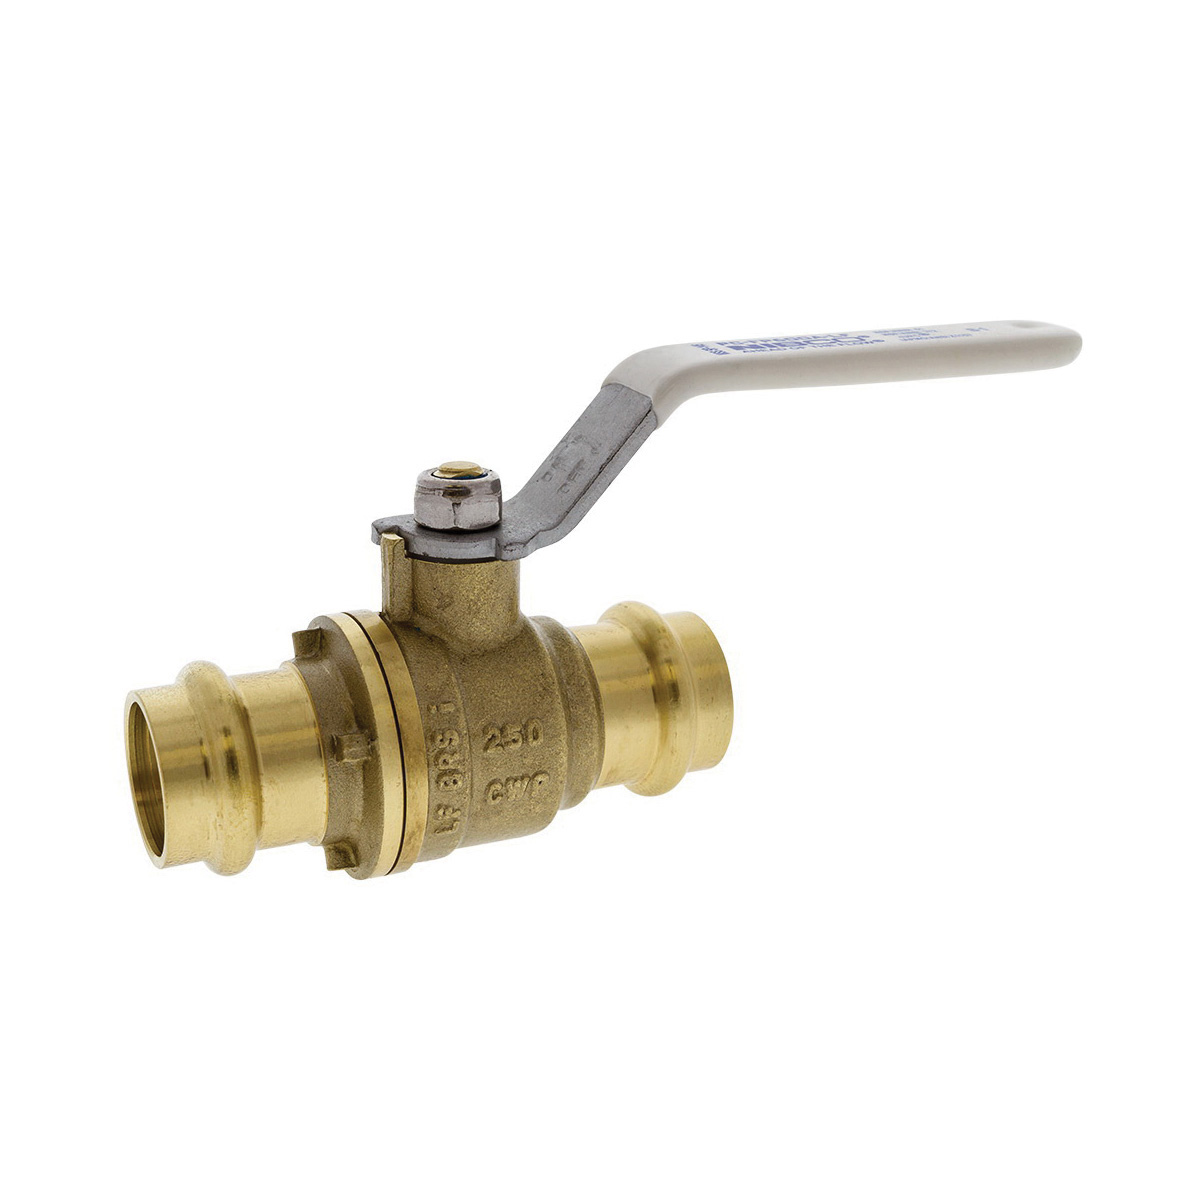 NIBCO® NF998X8 PC-FP-600A-LF Ball Valve, 3/4 in Nominal, Female Press End Style, Brass Body, Full Port, EPDM/PTFE Softgoods, Import